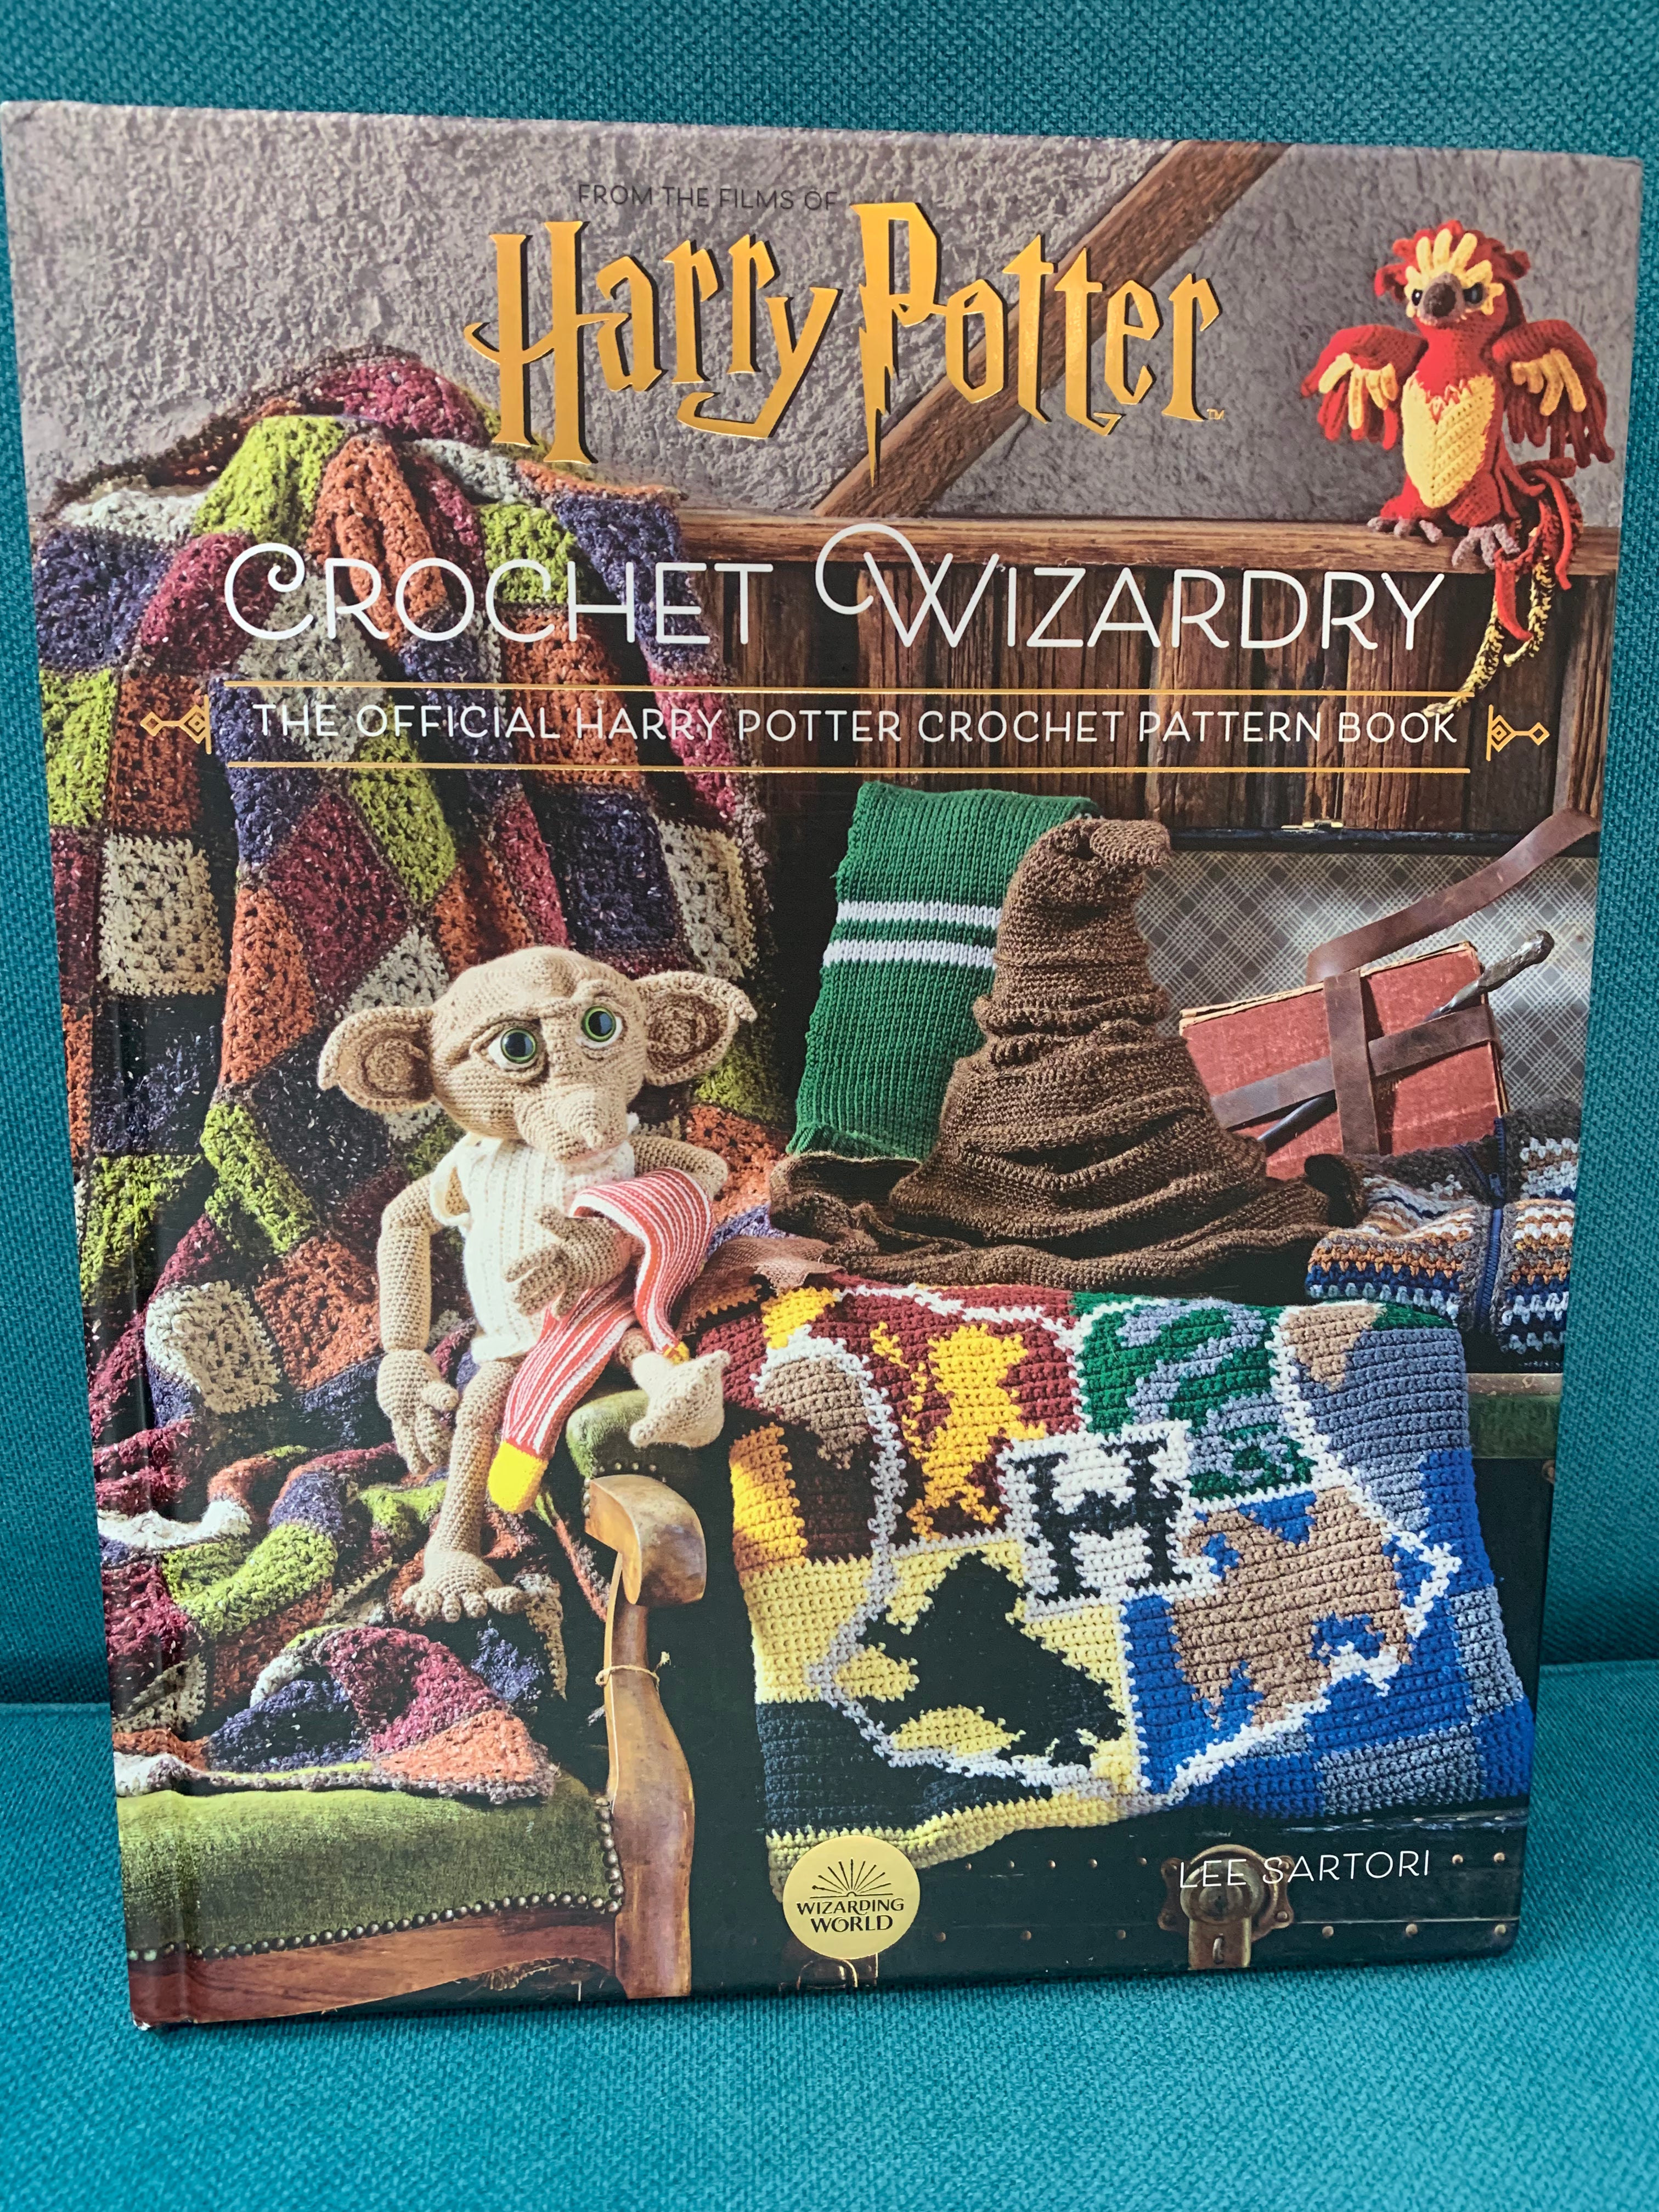 The Official Harry Potter Crochet Pattern Book - A Quick Review 